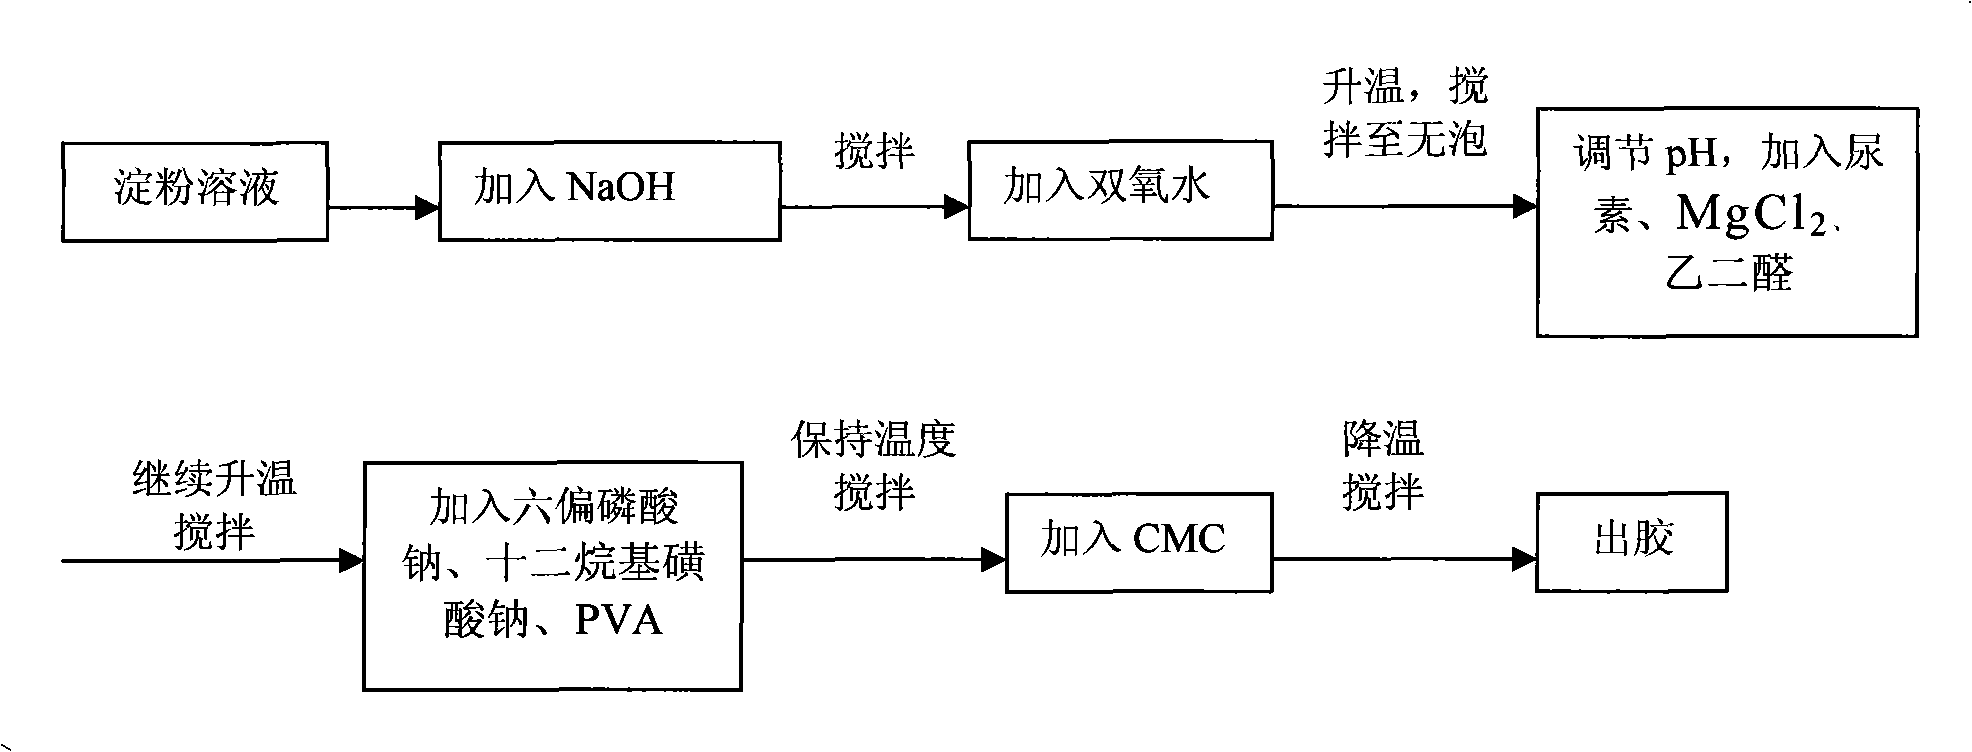 Method for preparing starch gum used for straw fiber products